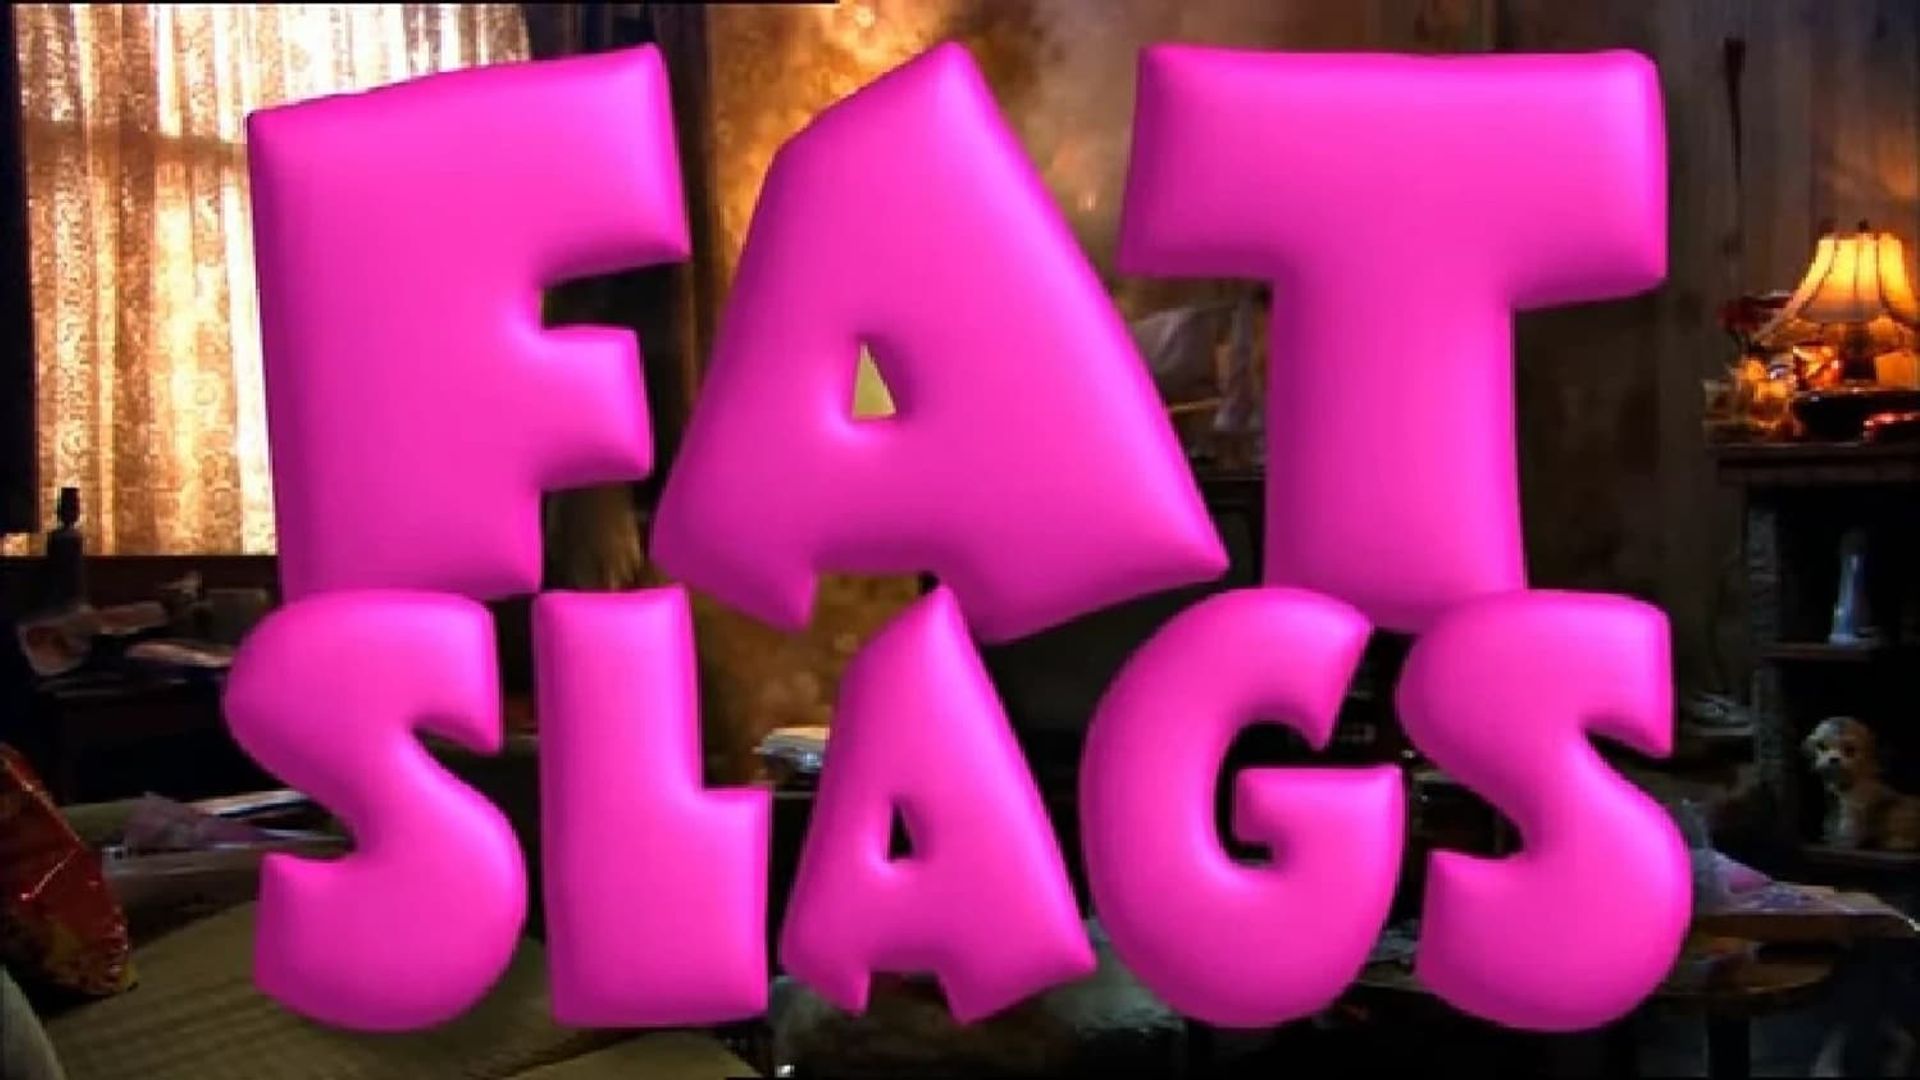 Fat Slags background